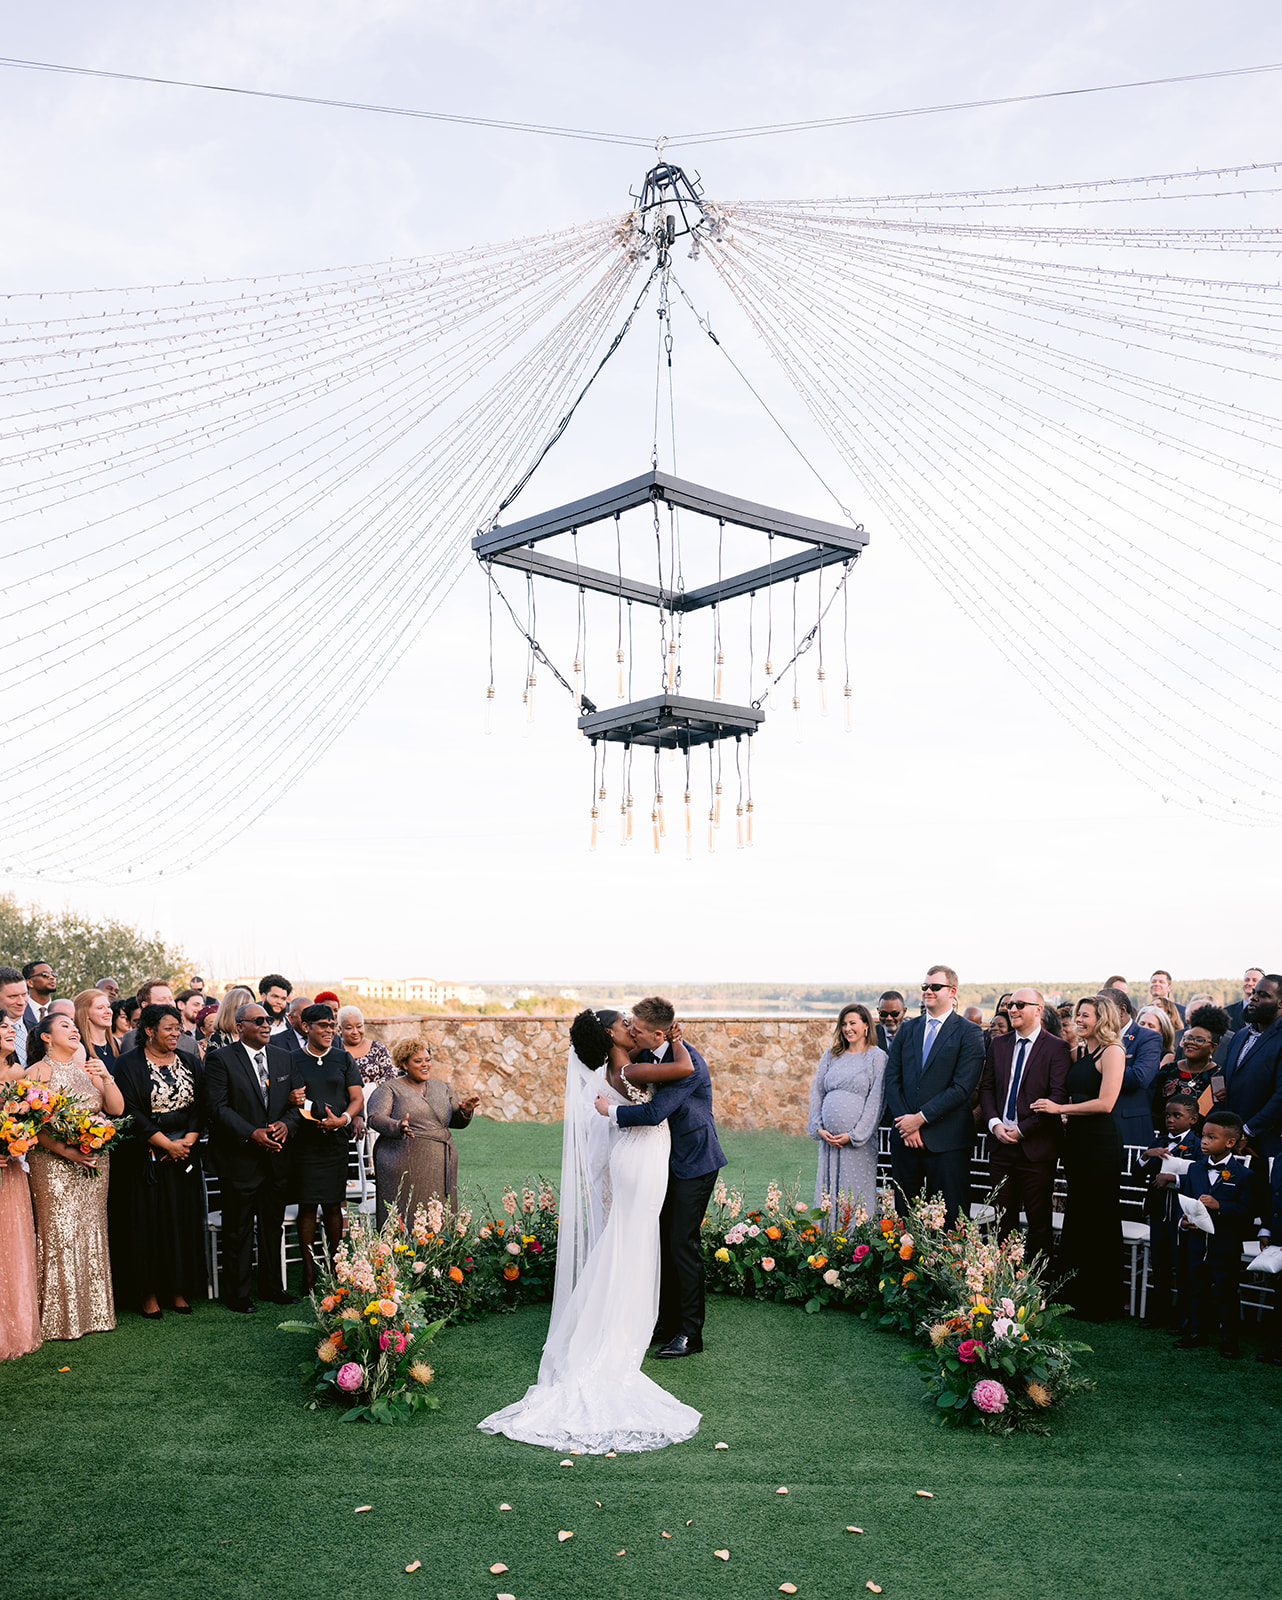 Bride and groom first kiss under a canopy of fairy lights surrounded by vibrant florals.